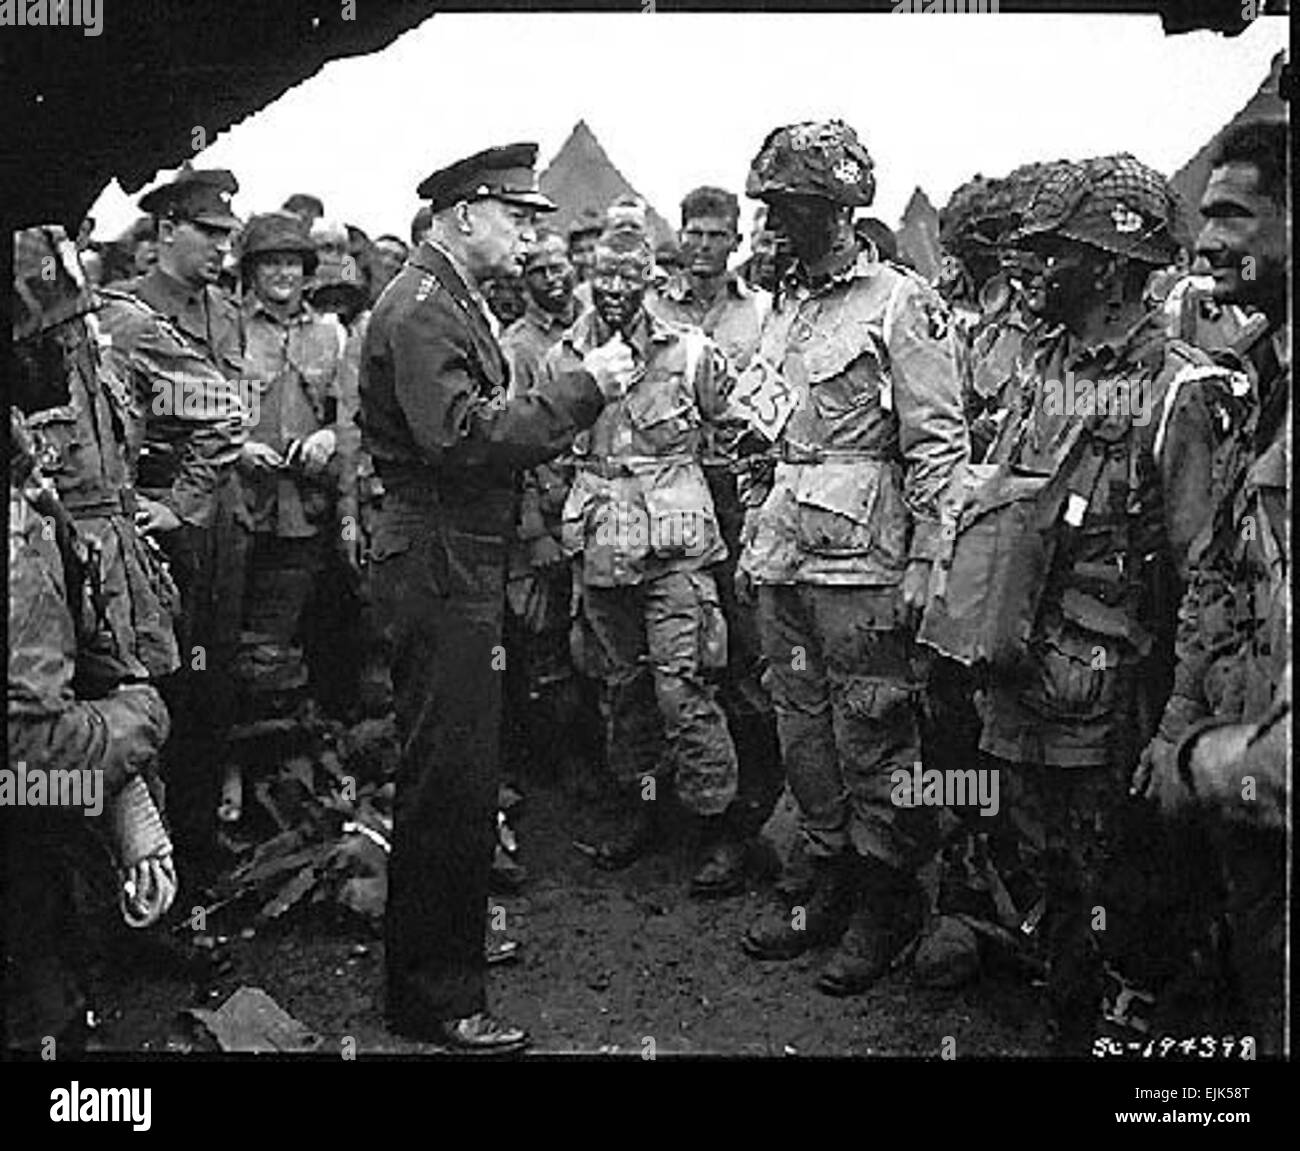 Supreme Allied Commander U.S. Army Gen. Dwight D. Eisenhower speaks with 101st Airborne Division paratroopers before they board airplanes and gliders to take part in a parachute assault into Normandy as part of the Allied Invasion of Europe, D-Day, June 6, 1944.  /d-day  /d-day Stock Photo